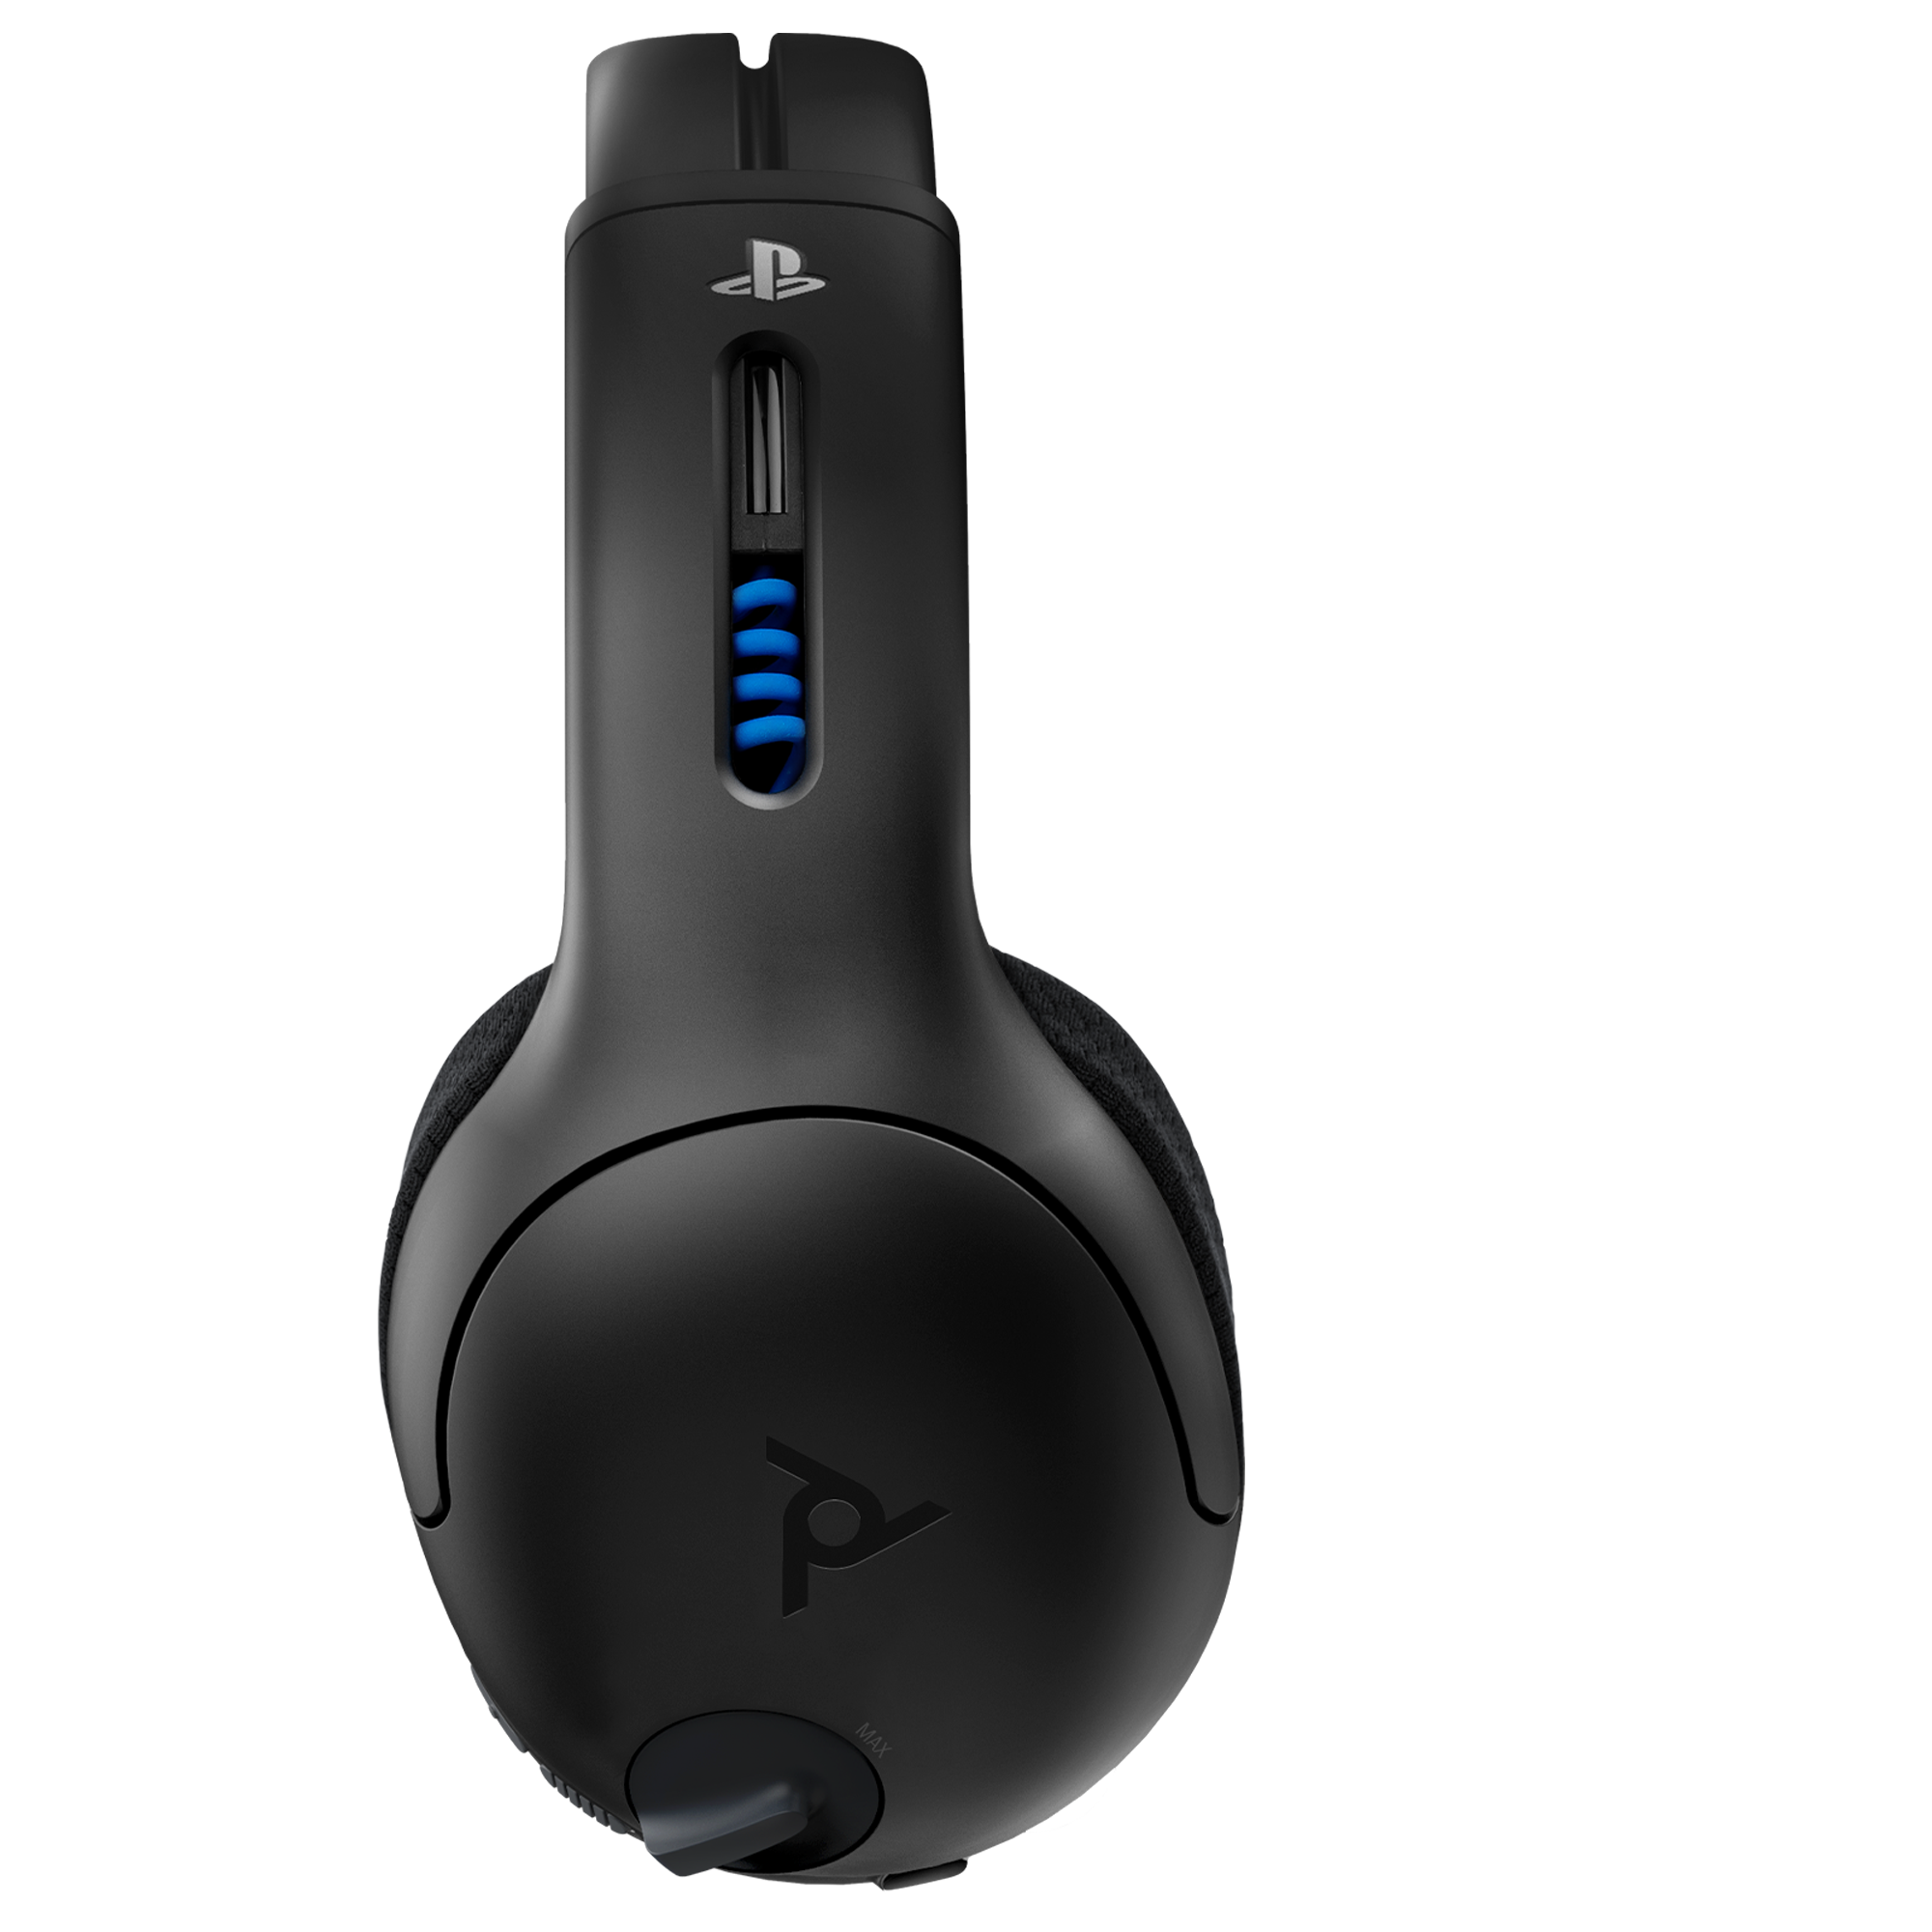 PDP LVL50 Wireless Review